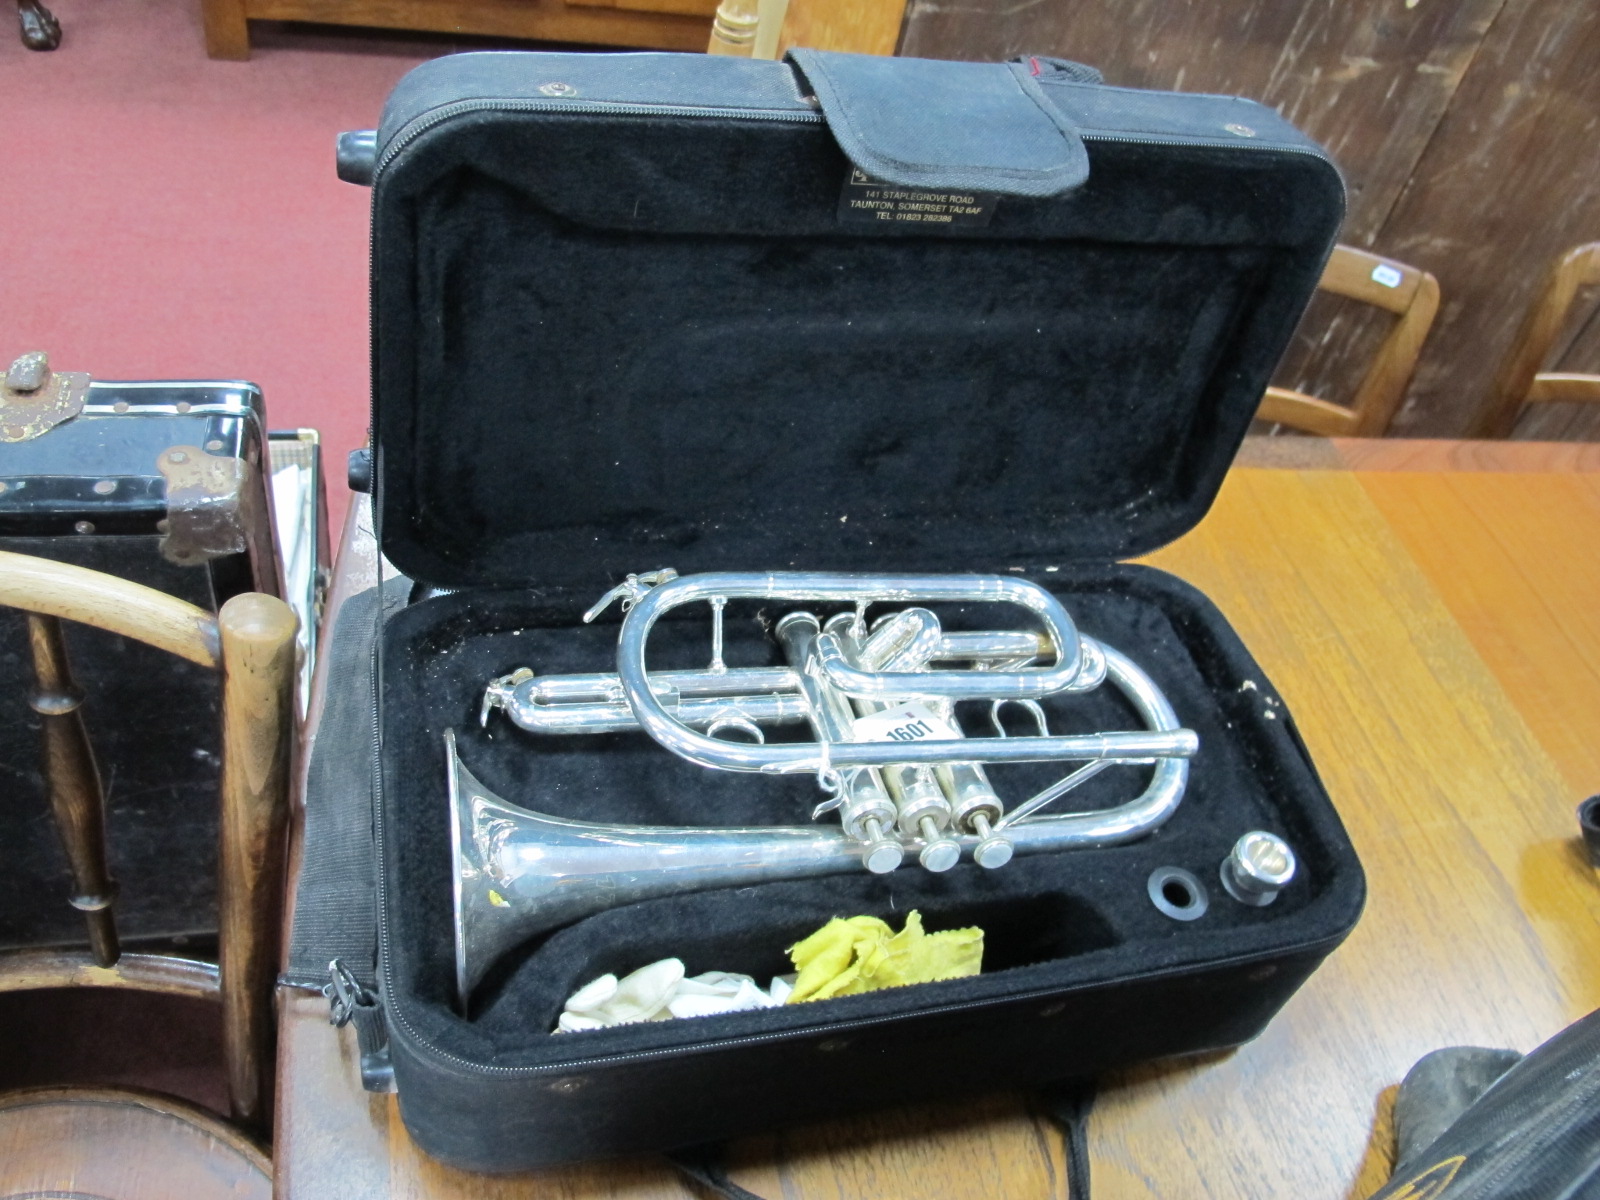 A Silver Plated Cornet, with mouth piece, in John Packer case.